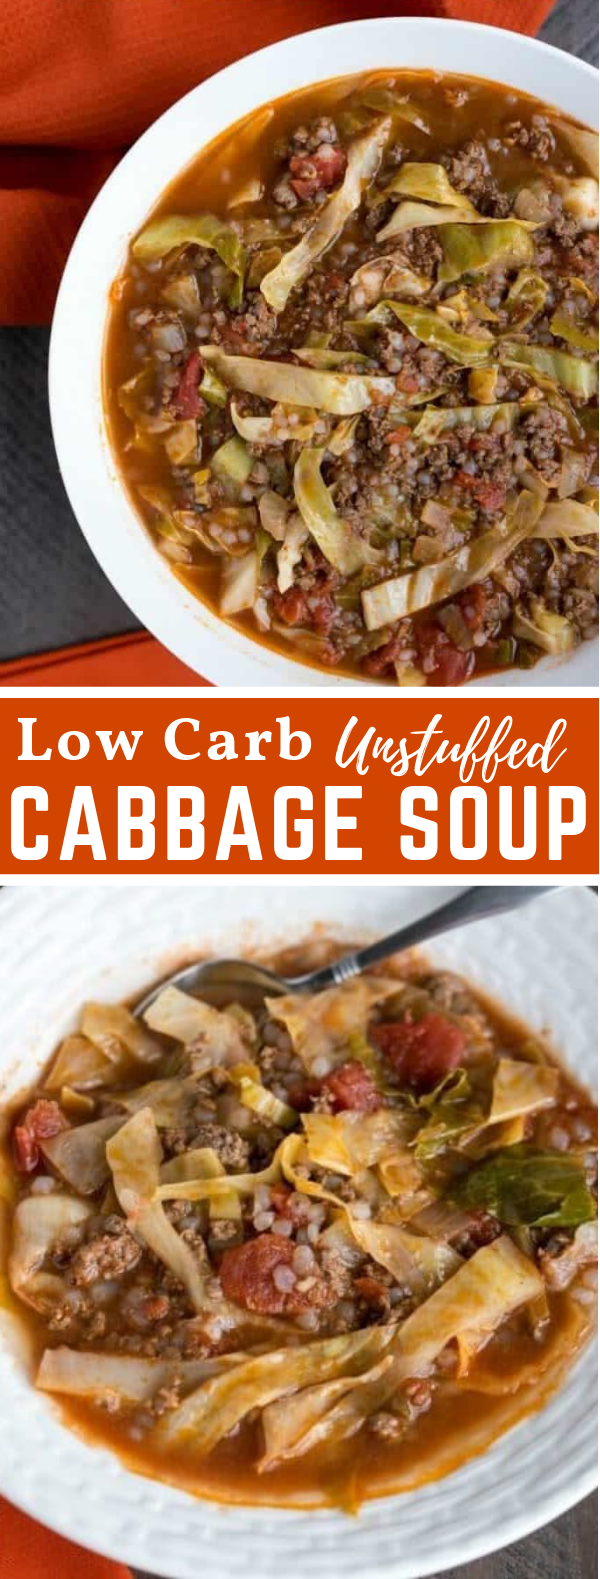 Easy Unstuffed Cabbage Soup #healthy #diet